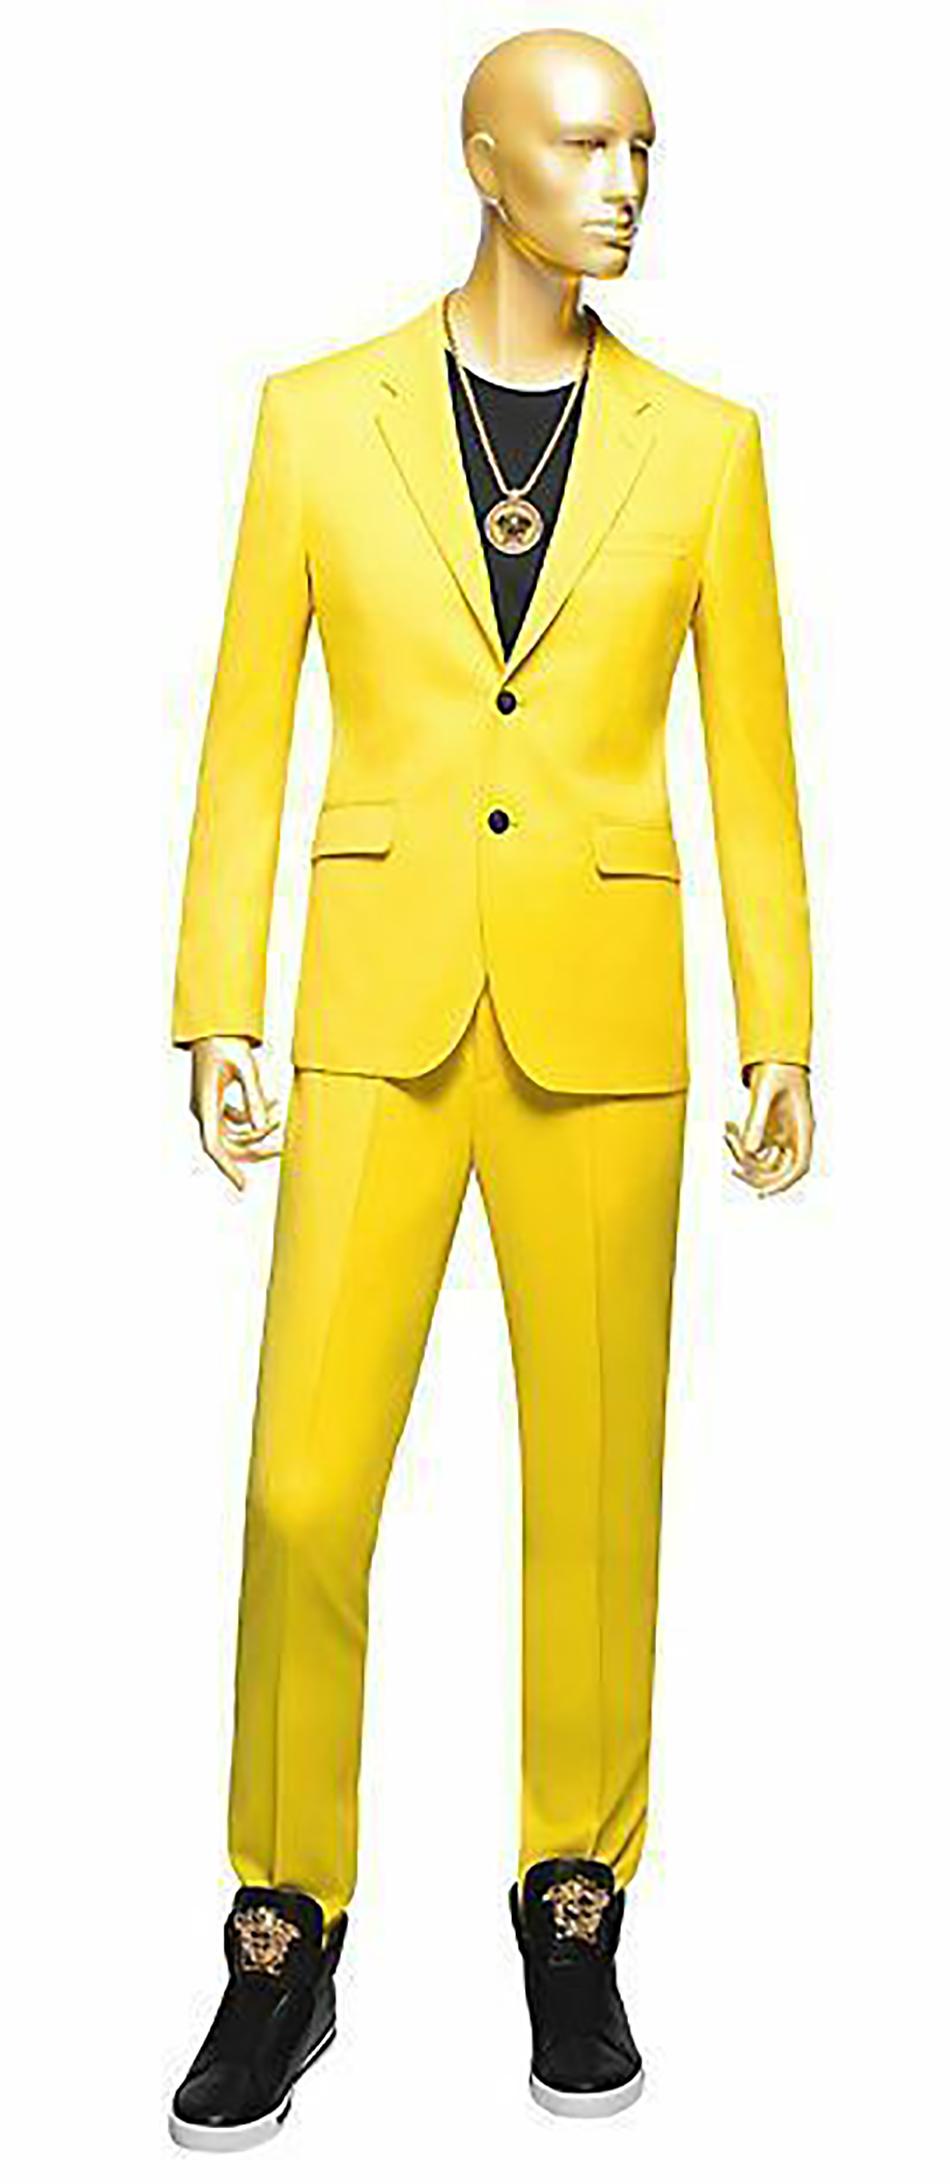 VERSACE  MEN'S SUIT
TAILOR MADE


Fresh and vibrant, this colored suit is a great look for the modern gentleman.

Content: 100% wool
lining: 63% viscose, 37% cupro

IT Size 58 -  US 48 (4XL)


Measurements:
Jacket:
 shoulder to shoulder 21